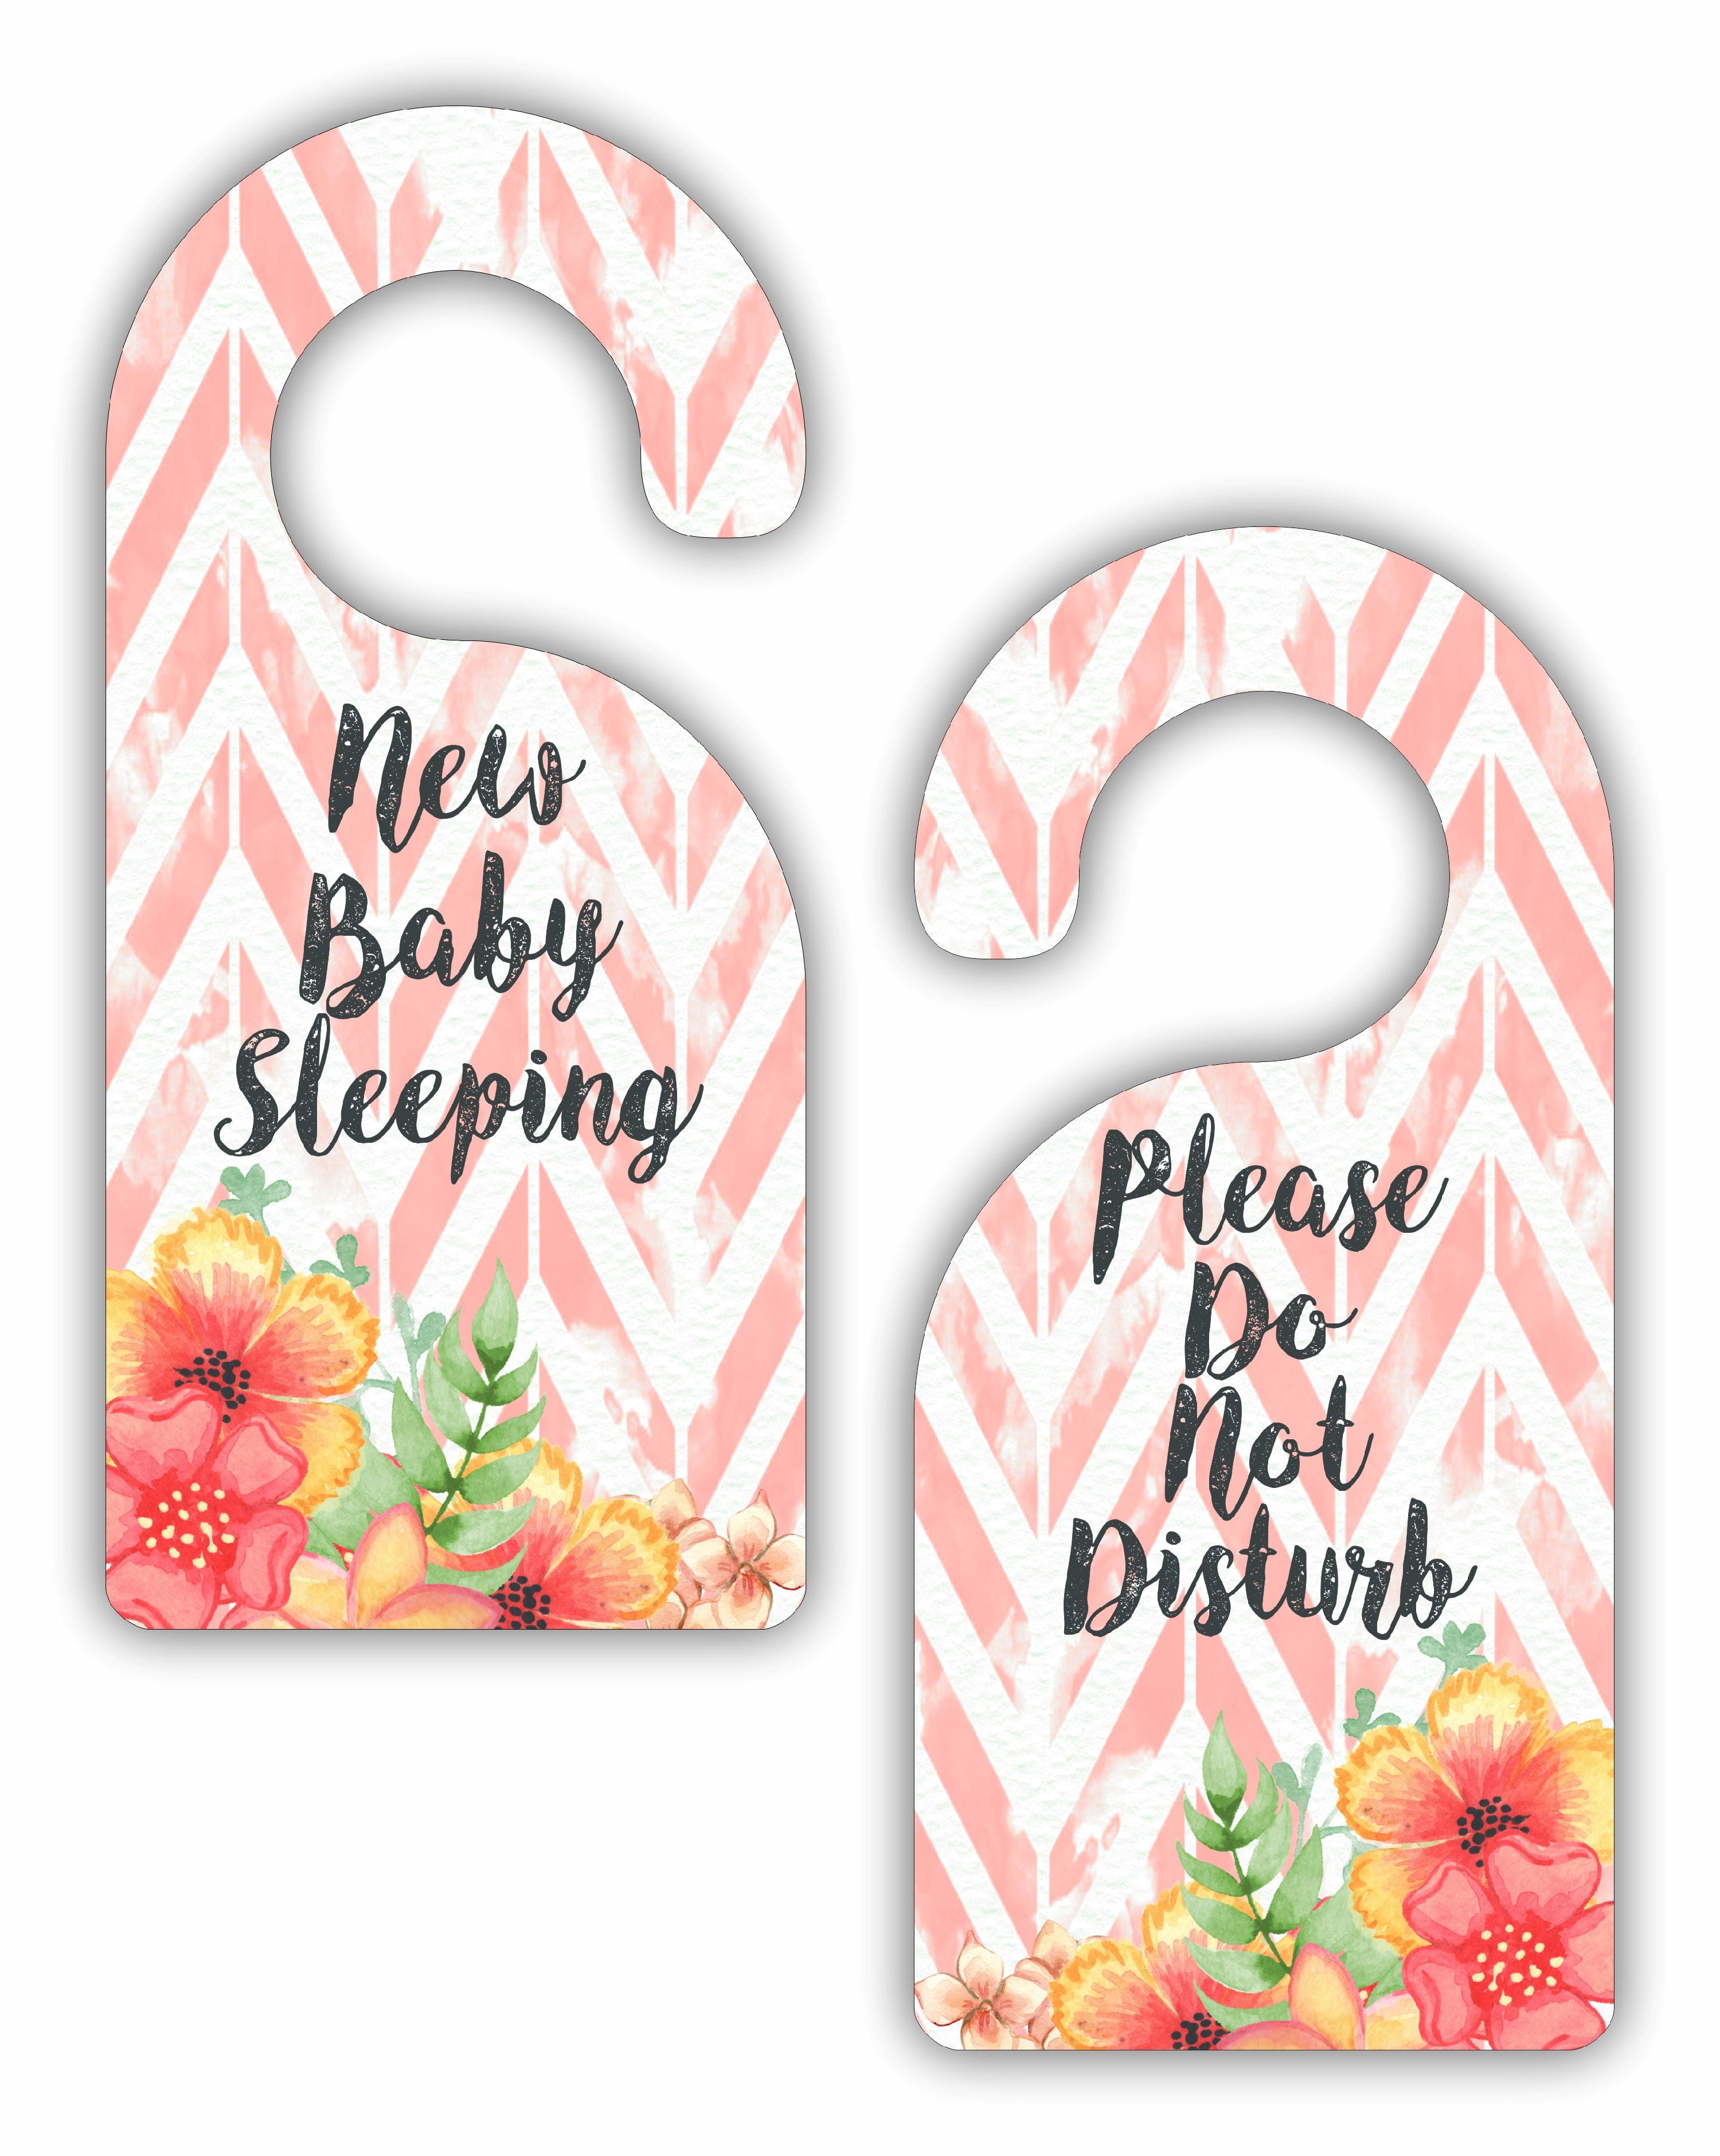 Shhh Its Naptime Naptime Door Sign Baby Gift Baby Shower Sleeping Baby Sign Baby Sleeping Sign New Baby Do Not Disturb Sign